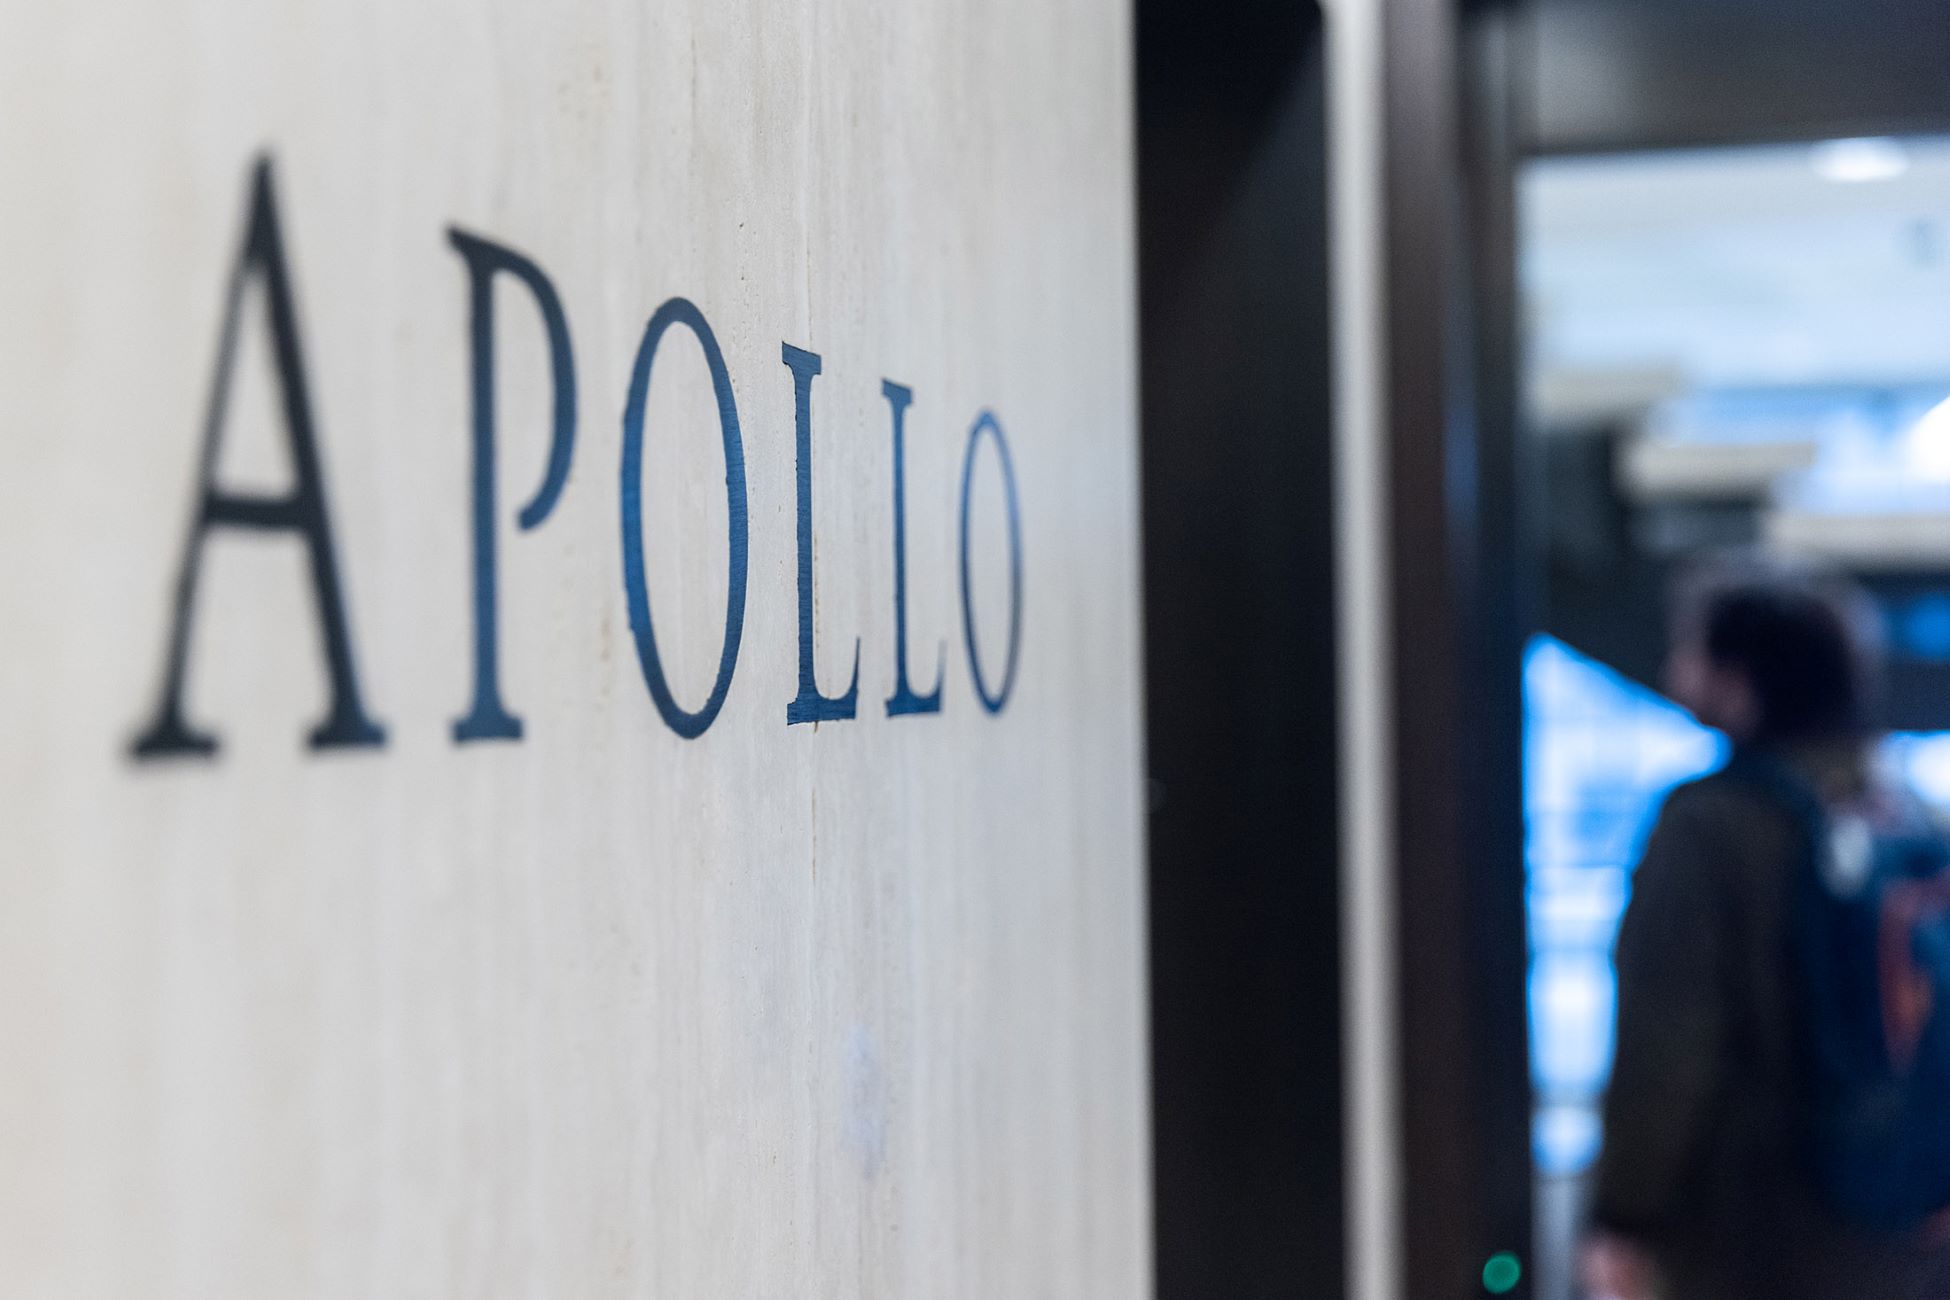 What Is The Symbol Of Apollo Investment Corporation?